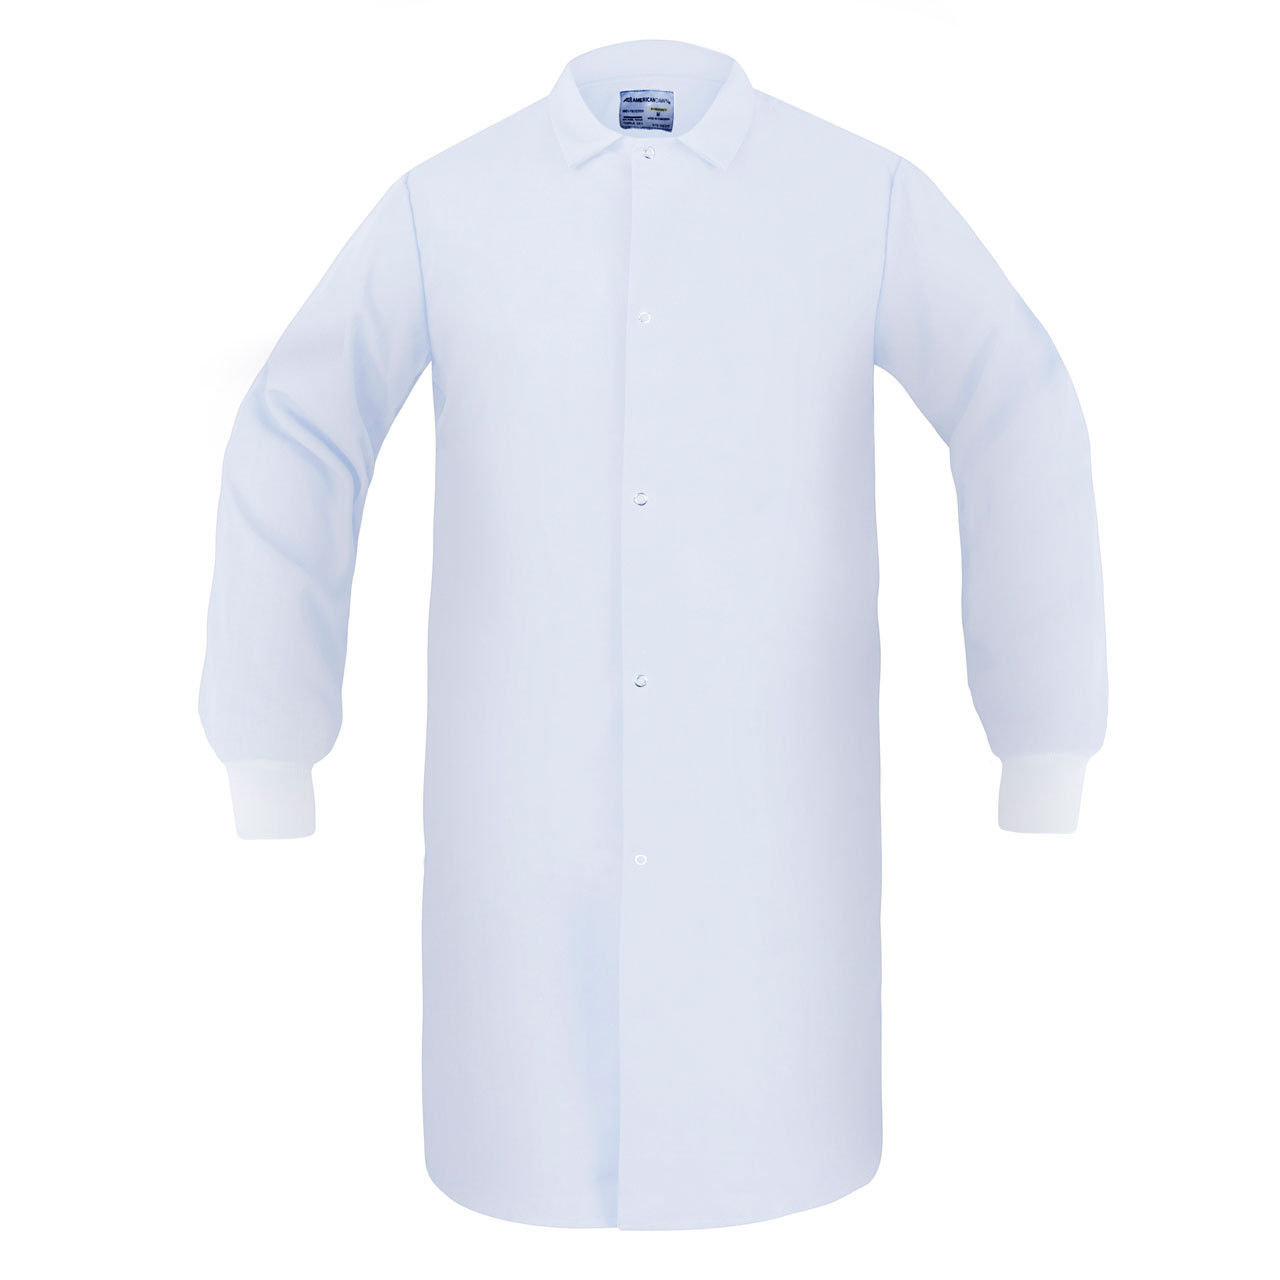 Can the HACCP Frock, No Pocket, Knit Cuff, White be used as HACCP uniforms in the OR?